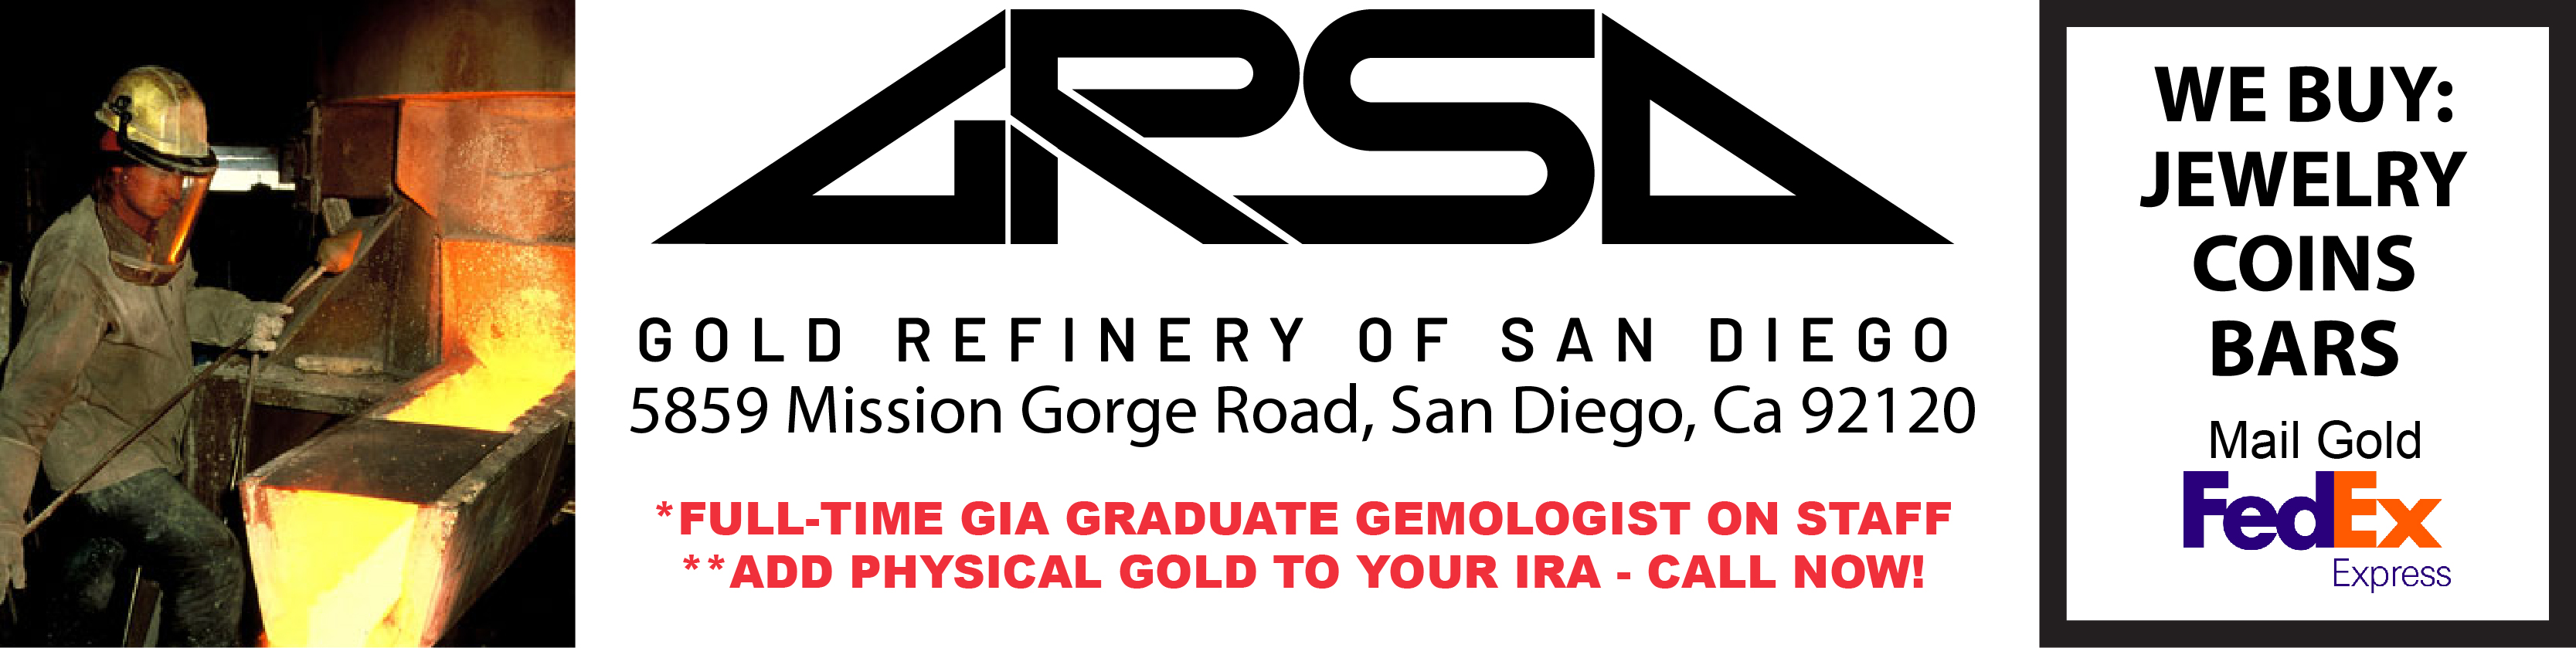 Gold Refinery of San Diego